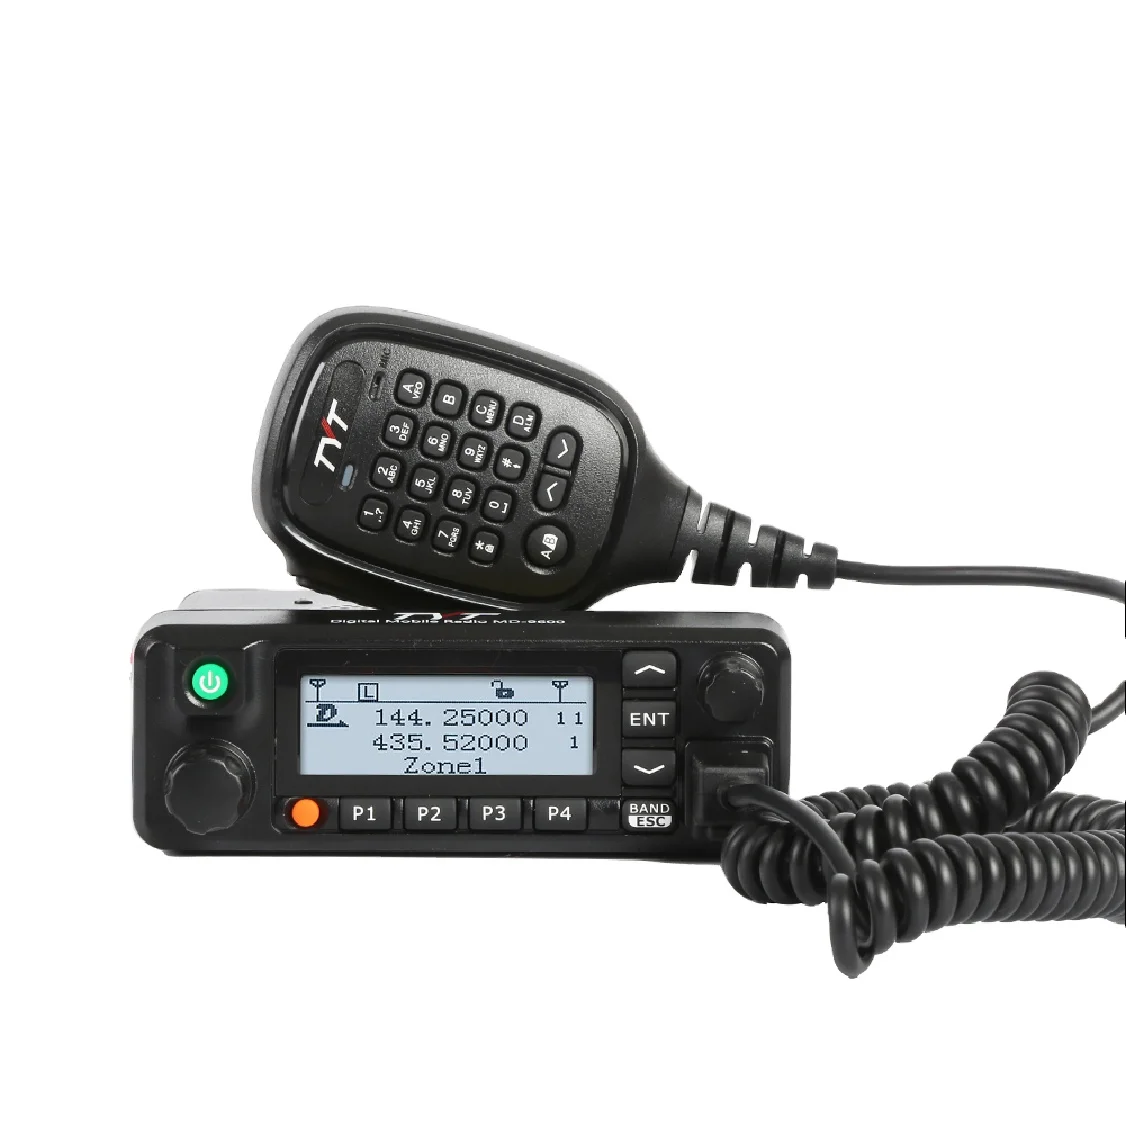 

TYT Mobile Radio MD-9600 GPS 50W DMR GPS Two Way Radio Dual Band VHF/UHF Car Mobile Transceiver w/ Programming Cable